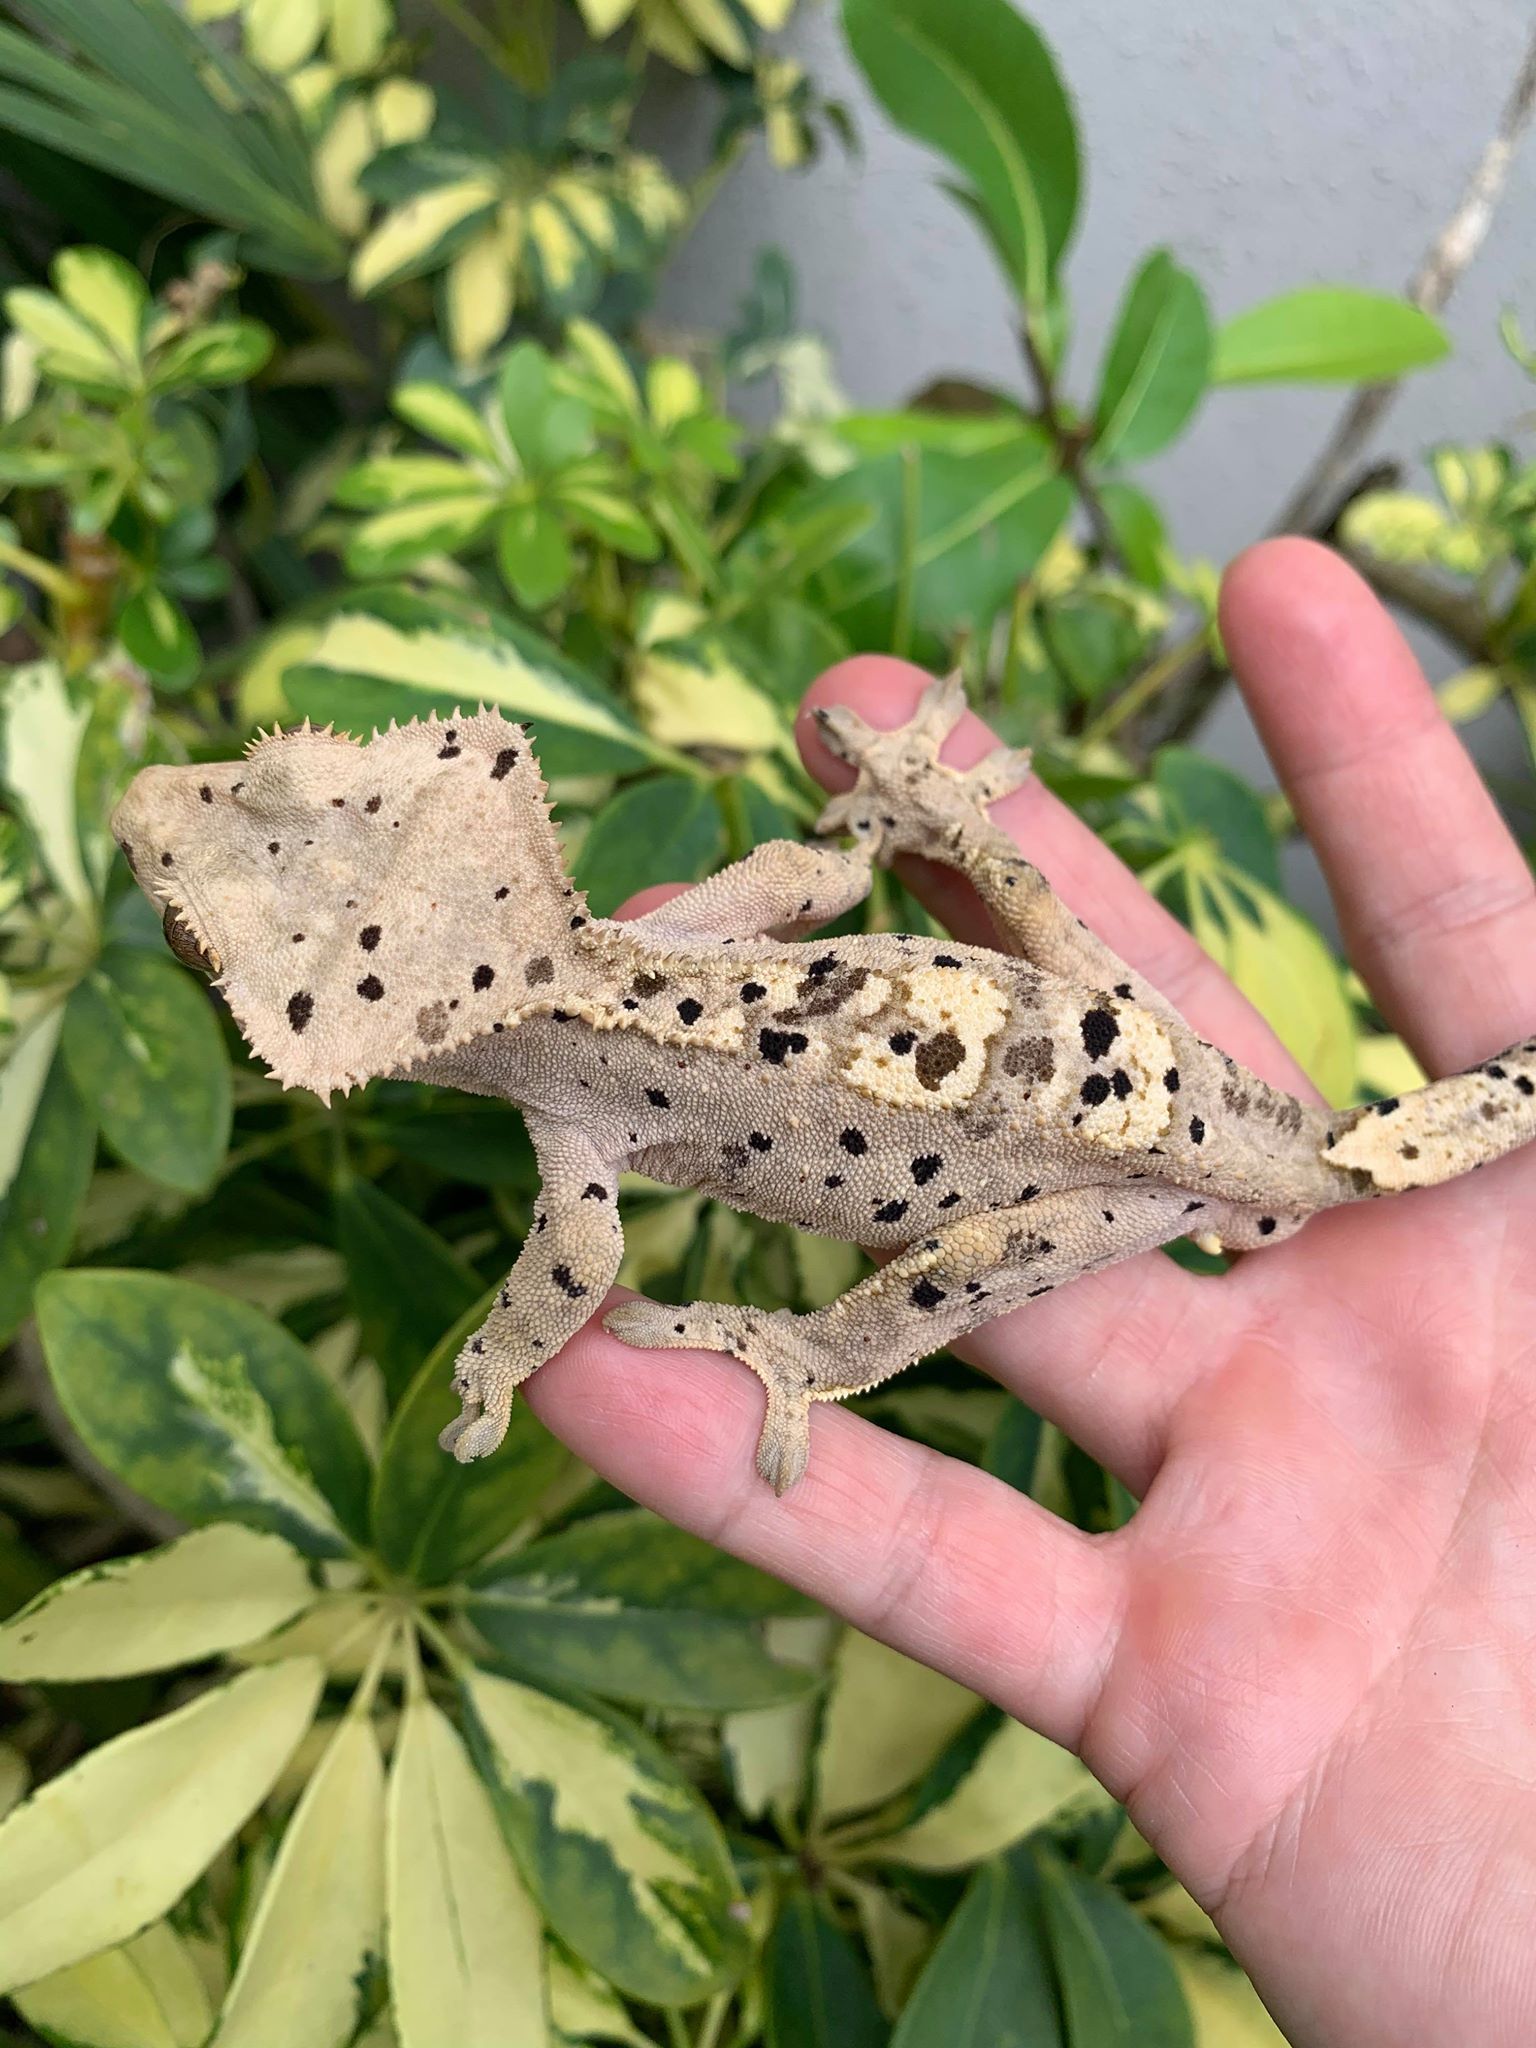 Super Dalmatian Crested Gecko by Snakes at Sunset